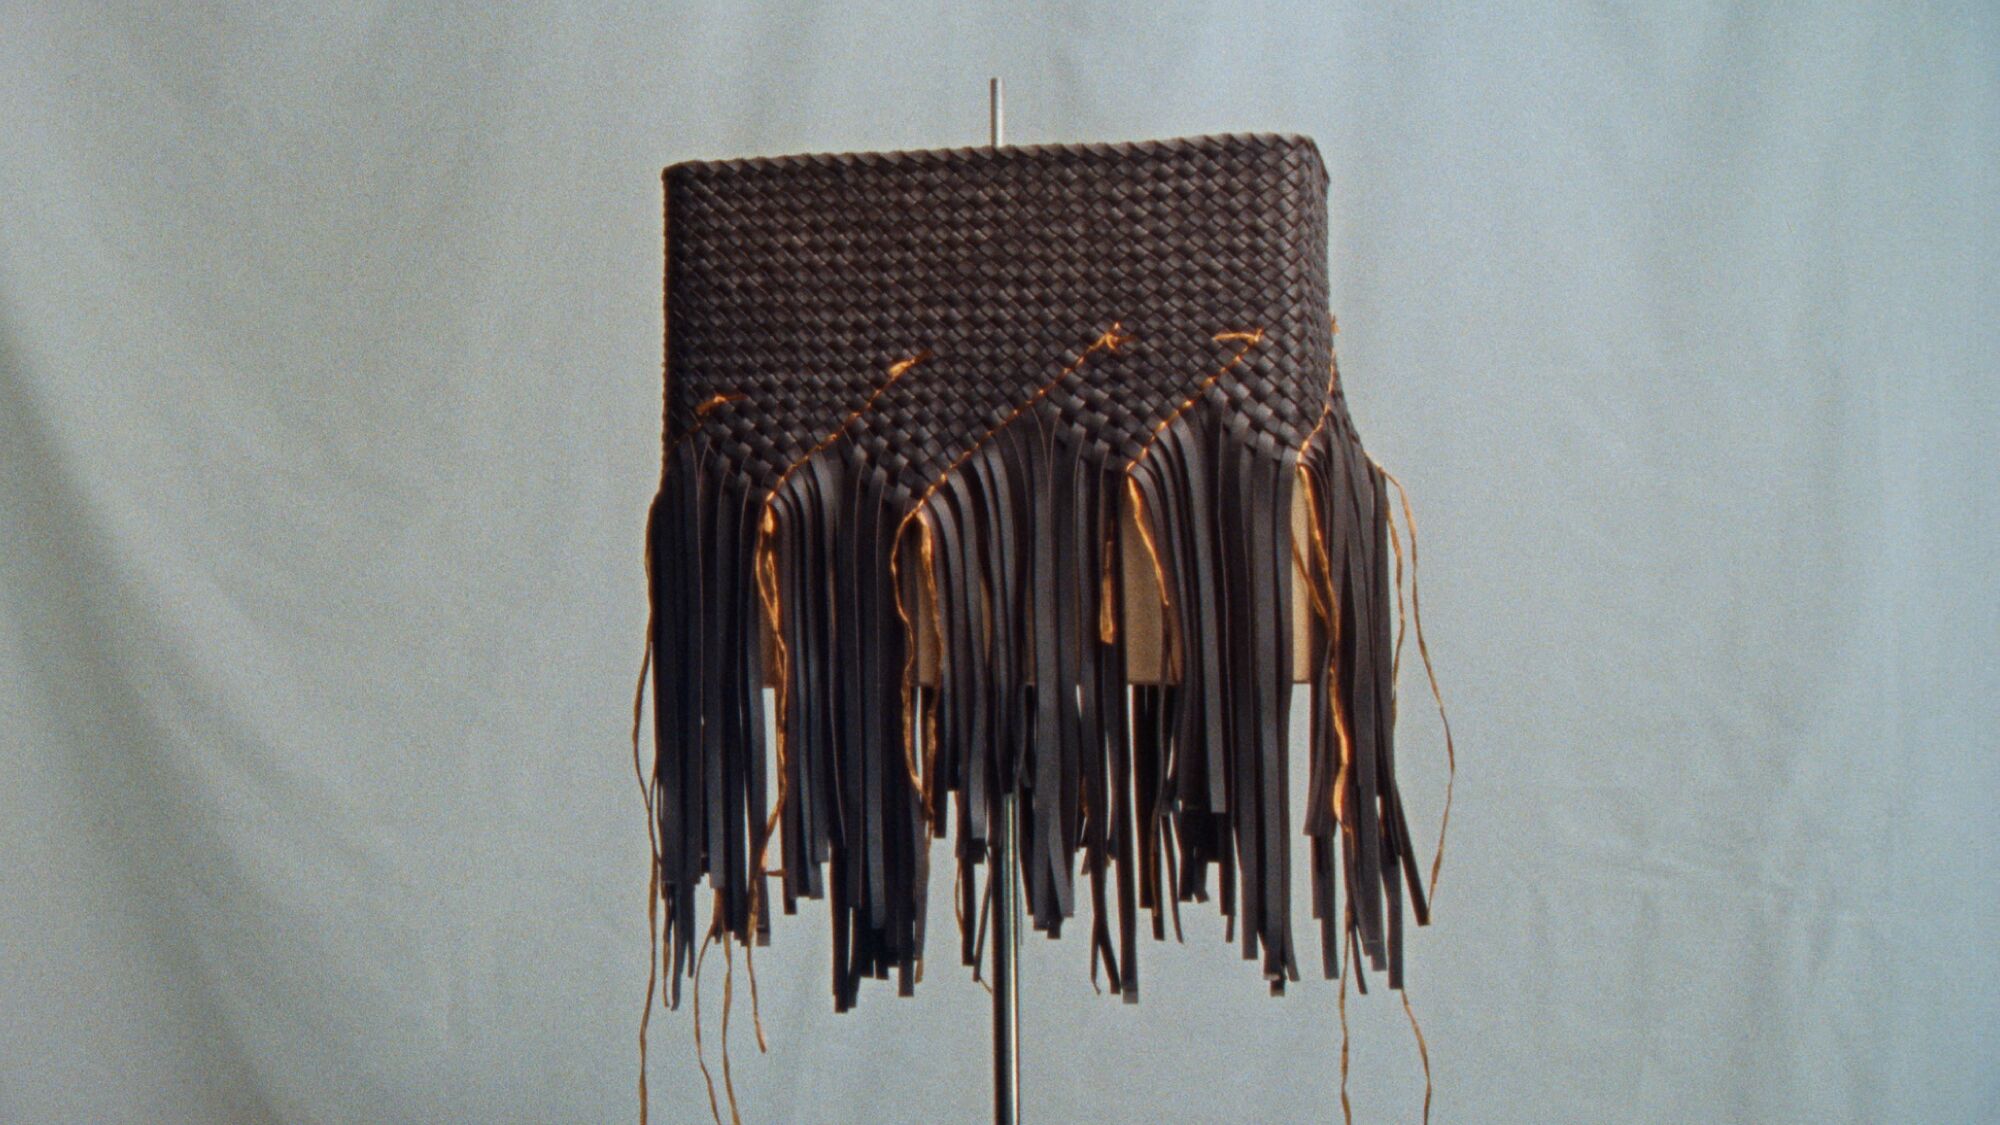 A shape made of strands of woven leather